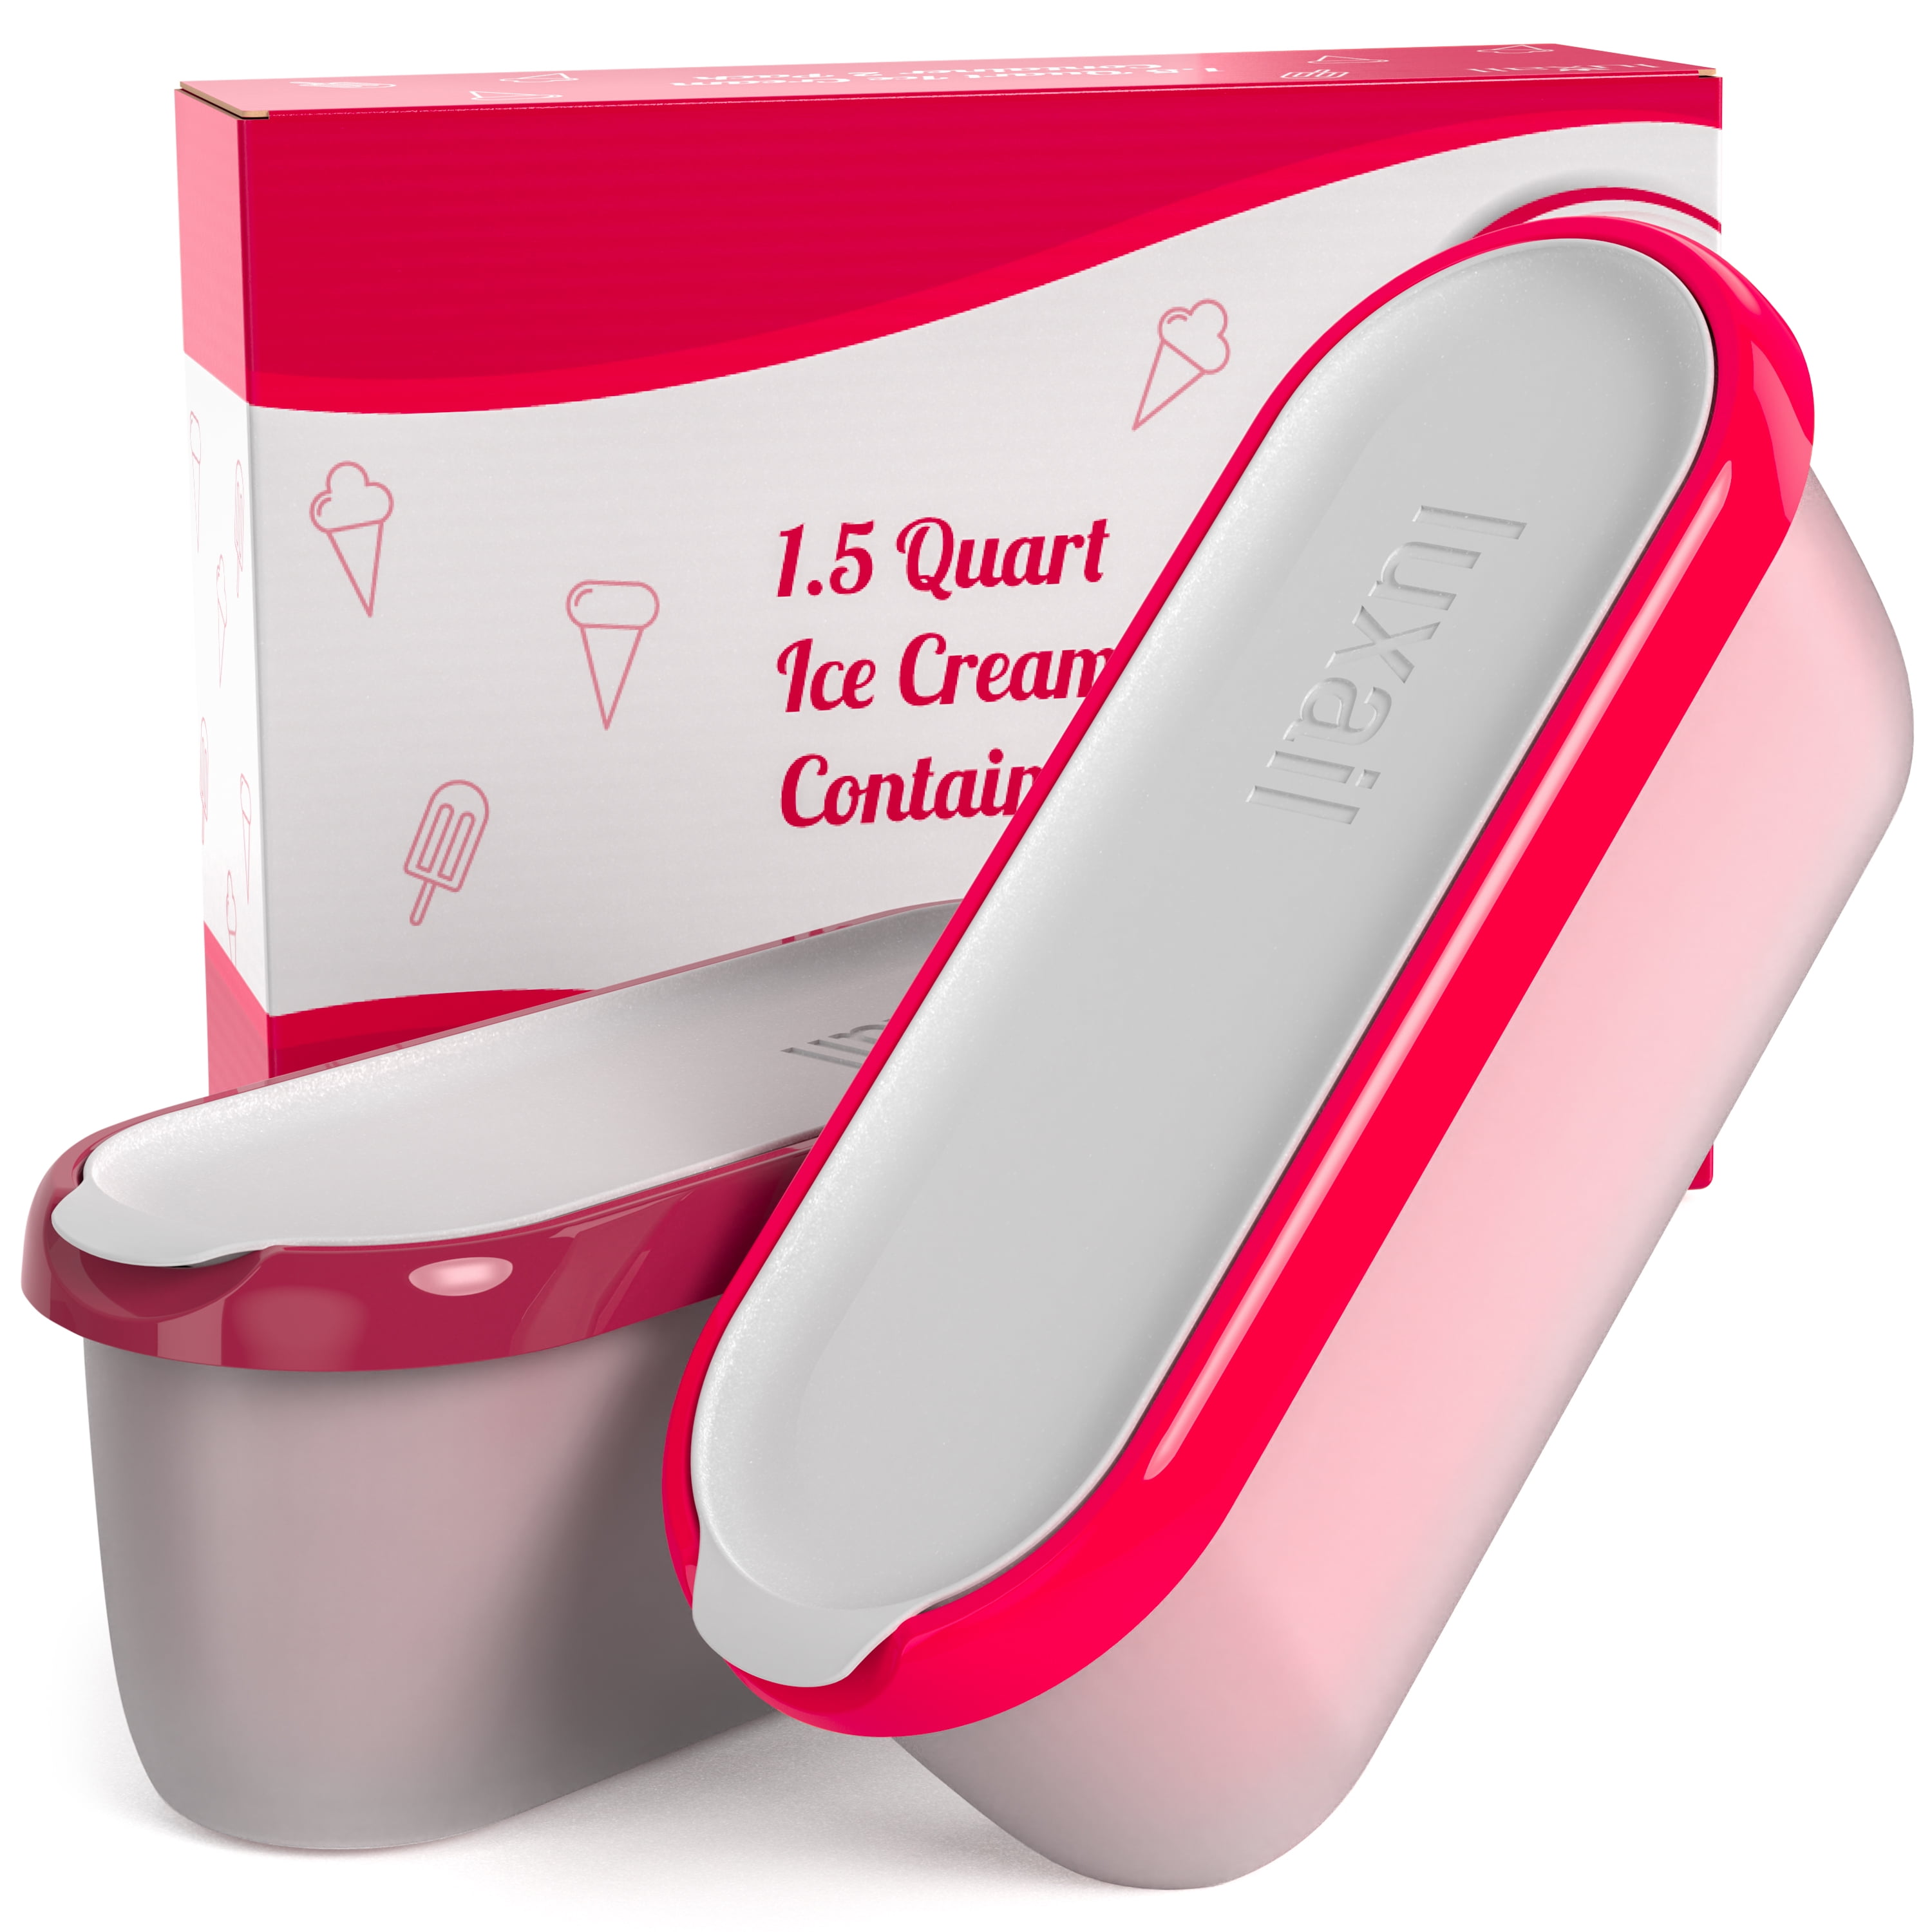 Luxail Ice Cream Containers, 1.5 Quart, Red and Burgundy 